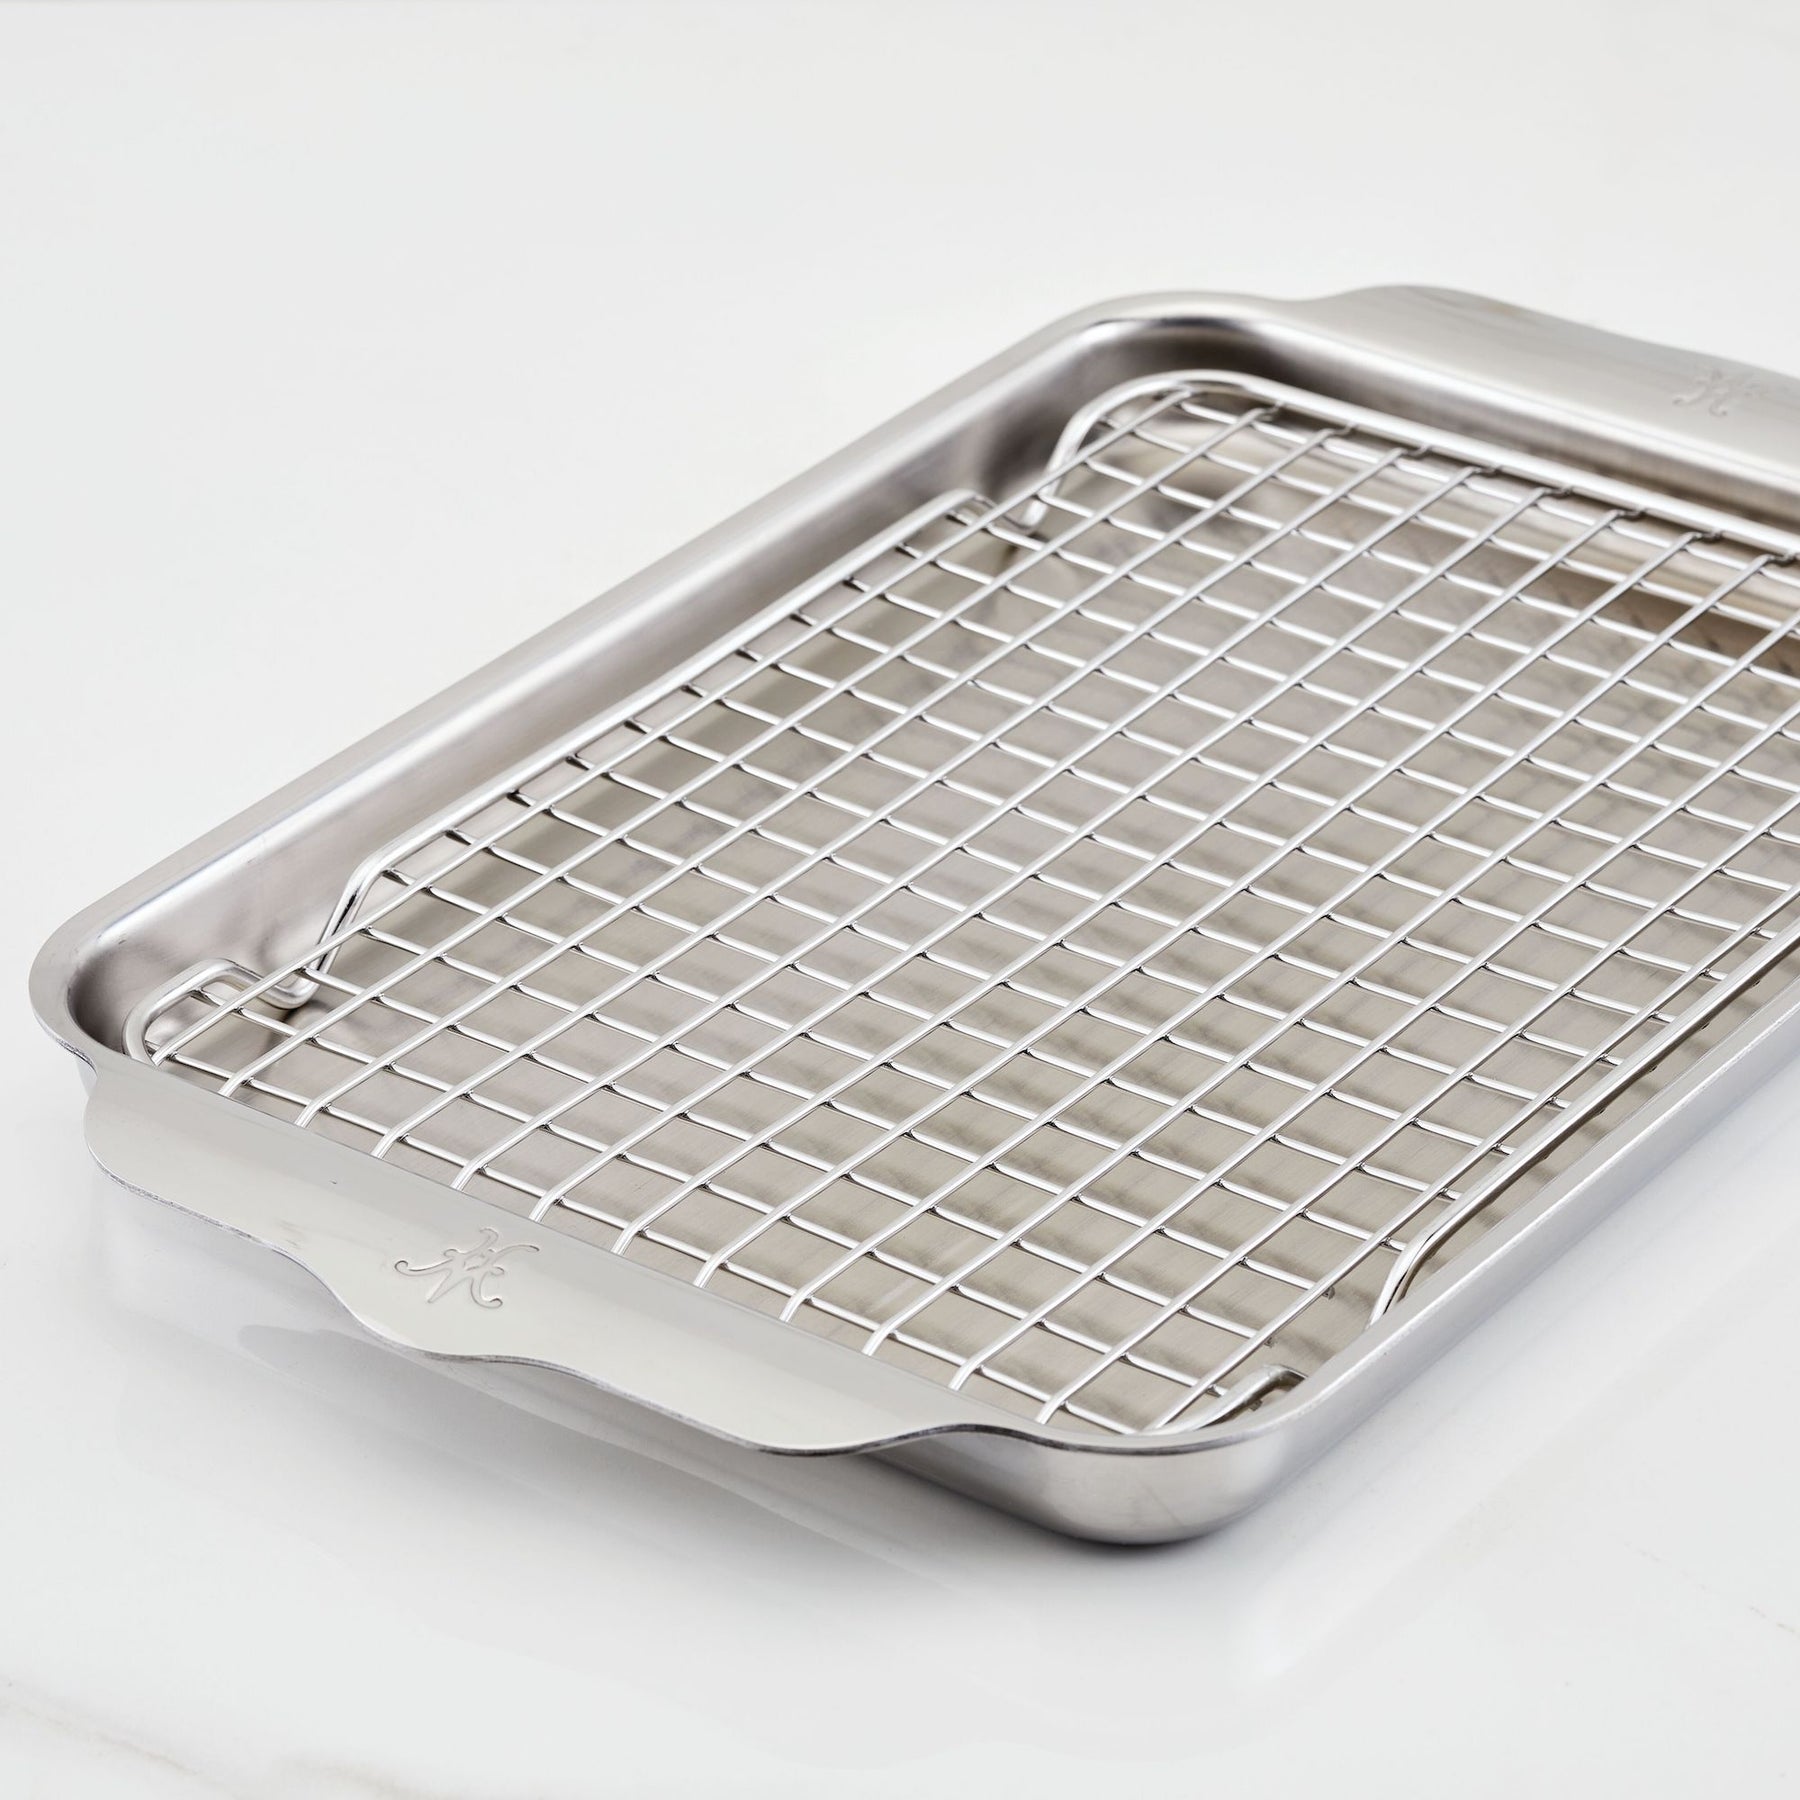 Last Confection (Set of 2) Stainless Steel Baking & Cooling Racks - Cookie  Baker's Oven Sheet Pan Wire Rack